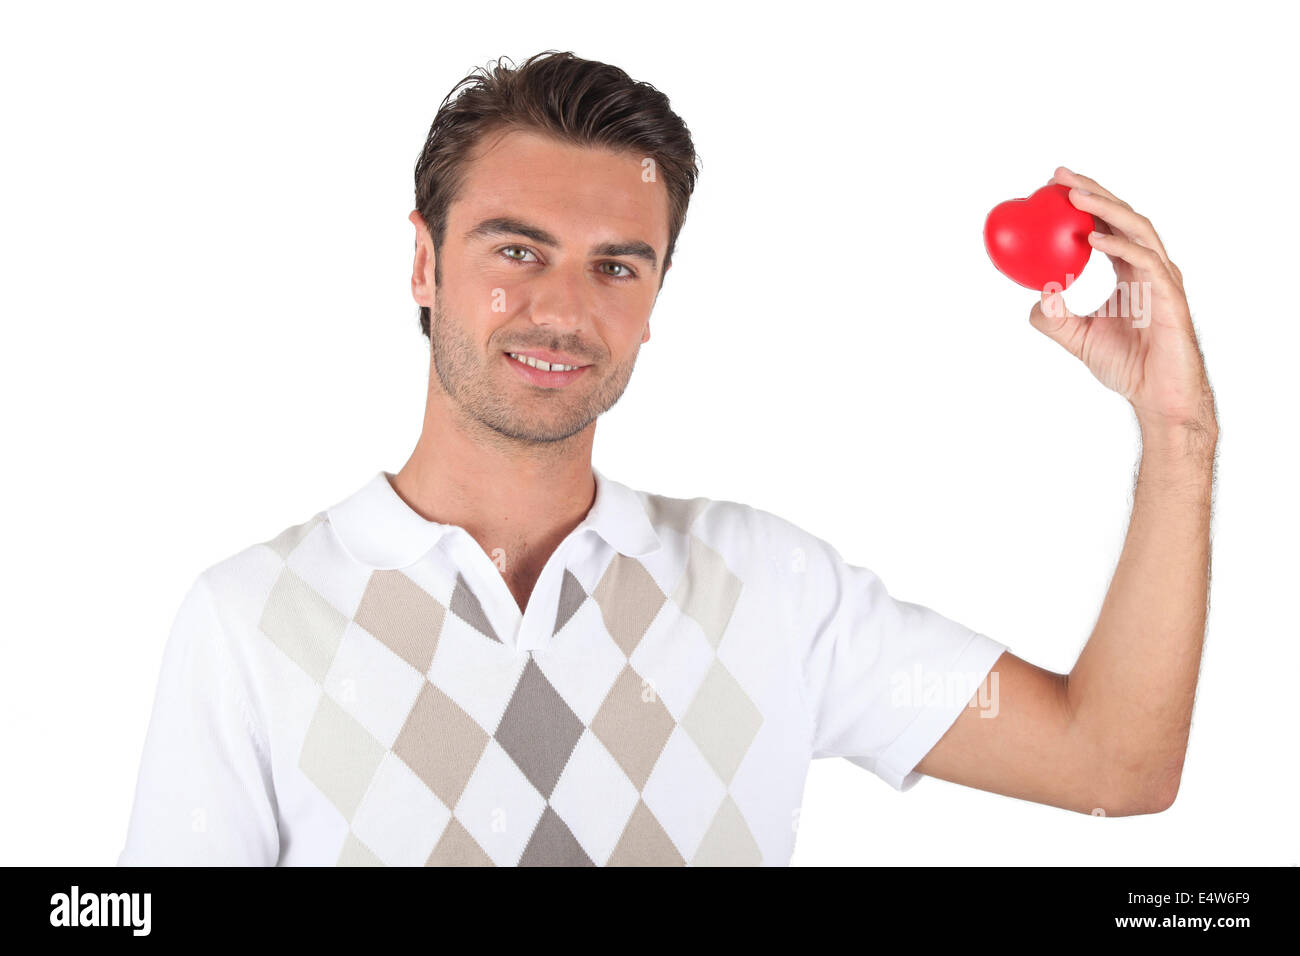 Holding a heart-shaped object Stock Photo